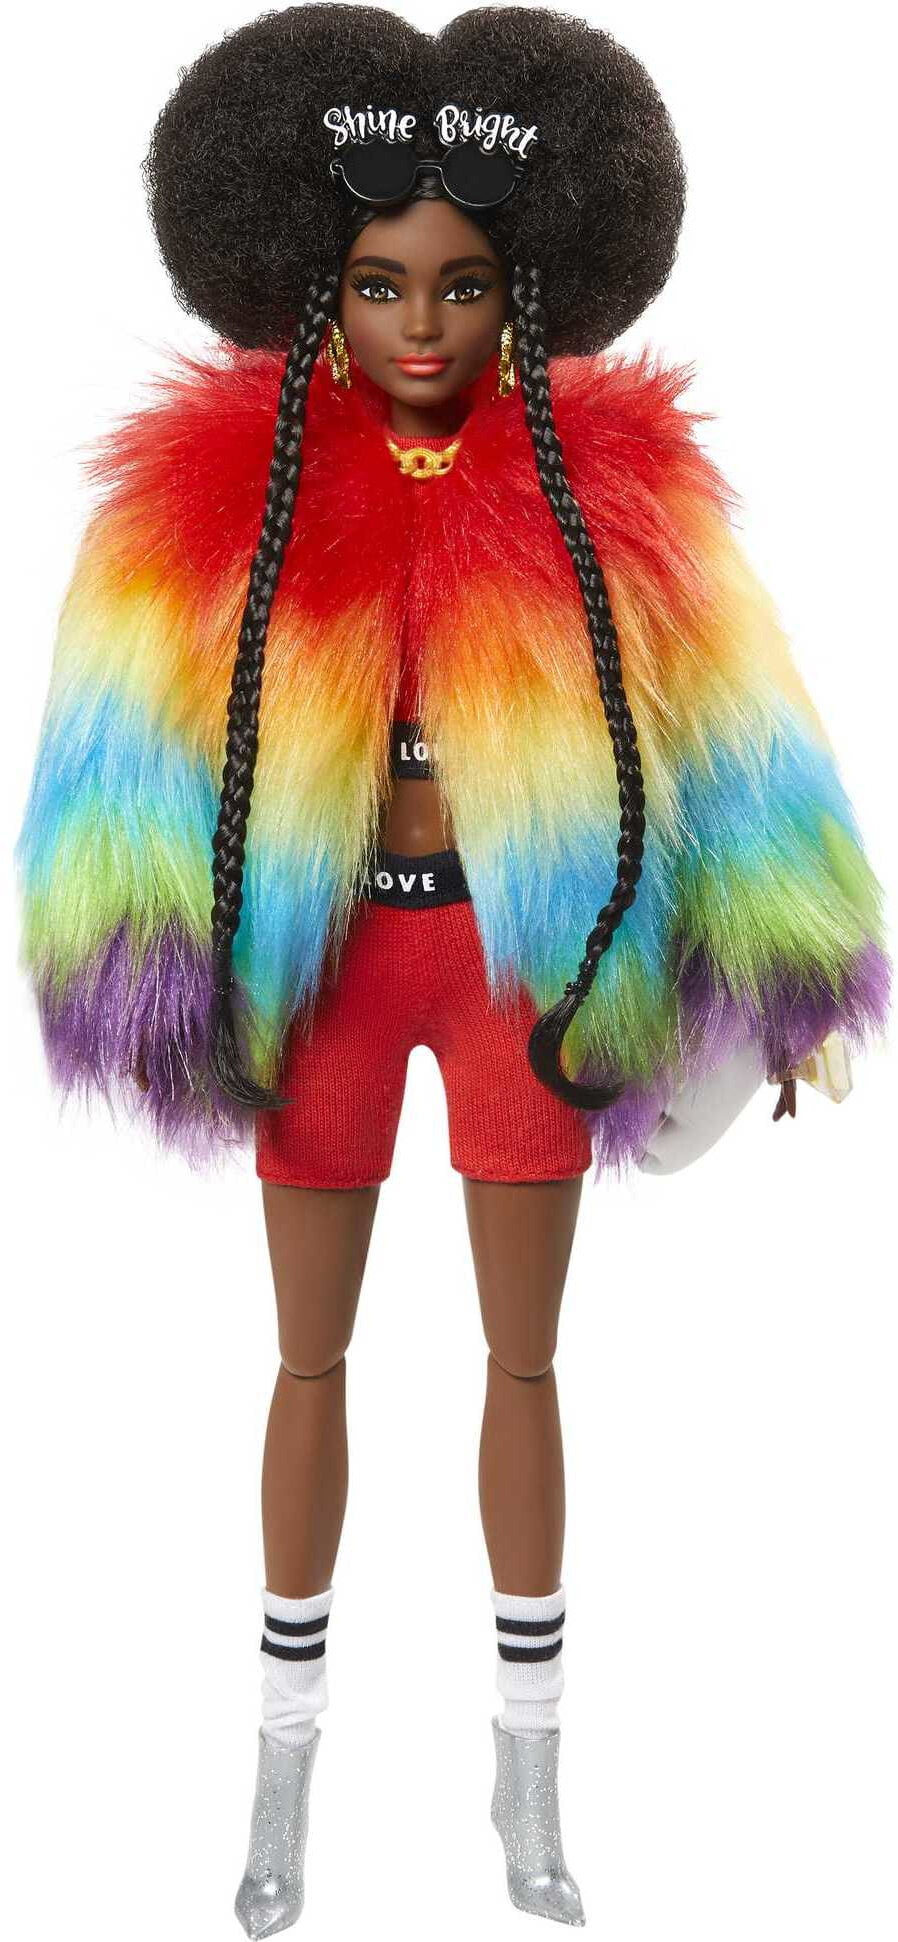 Barbie Extra Doll in Rainbow Coat with Pet Dog 